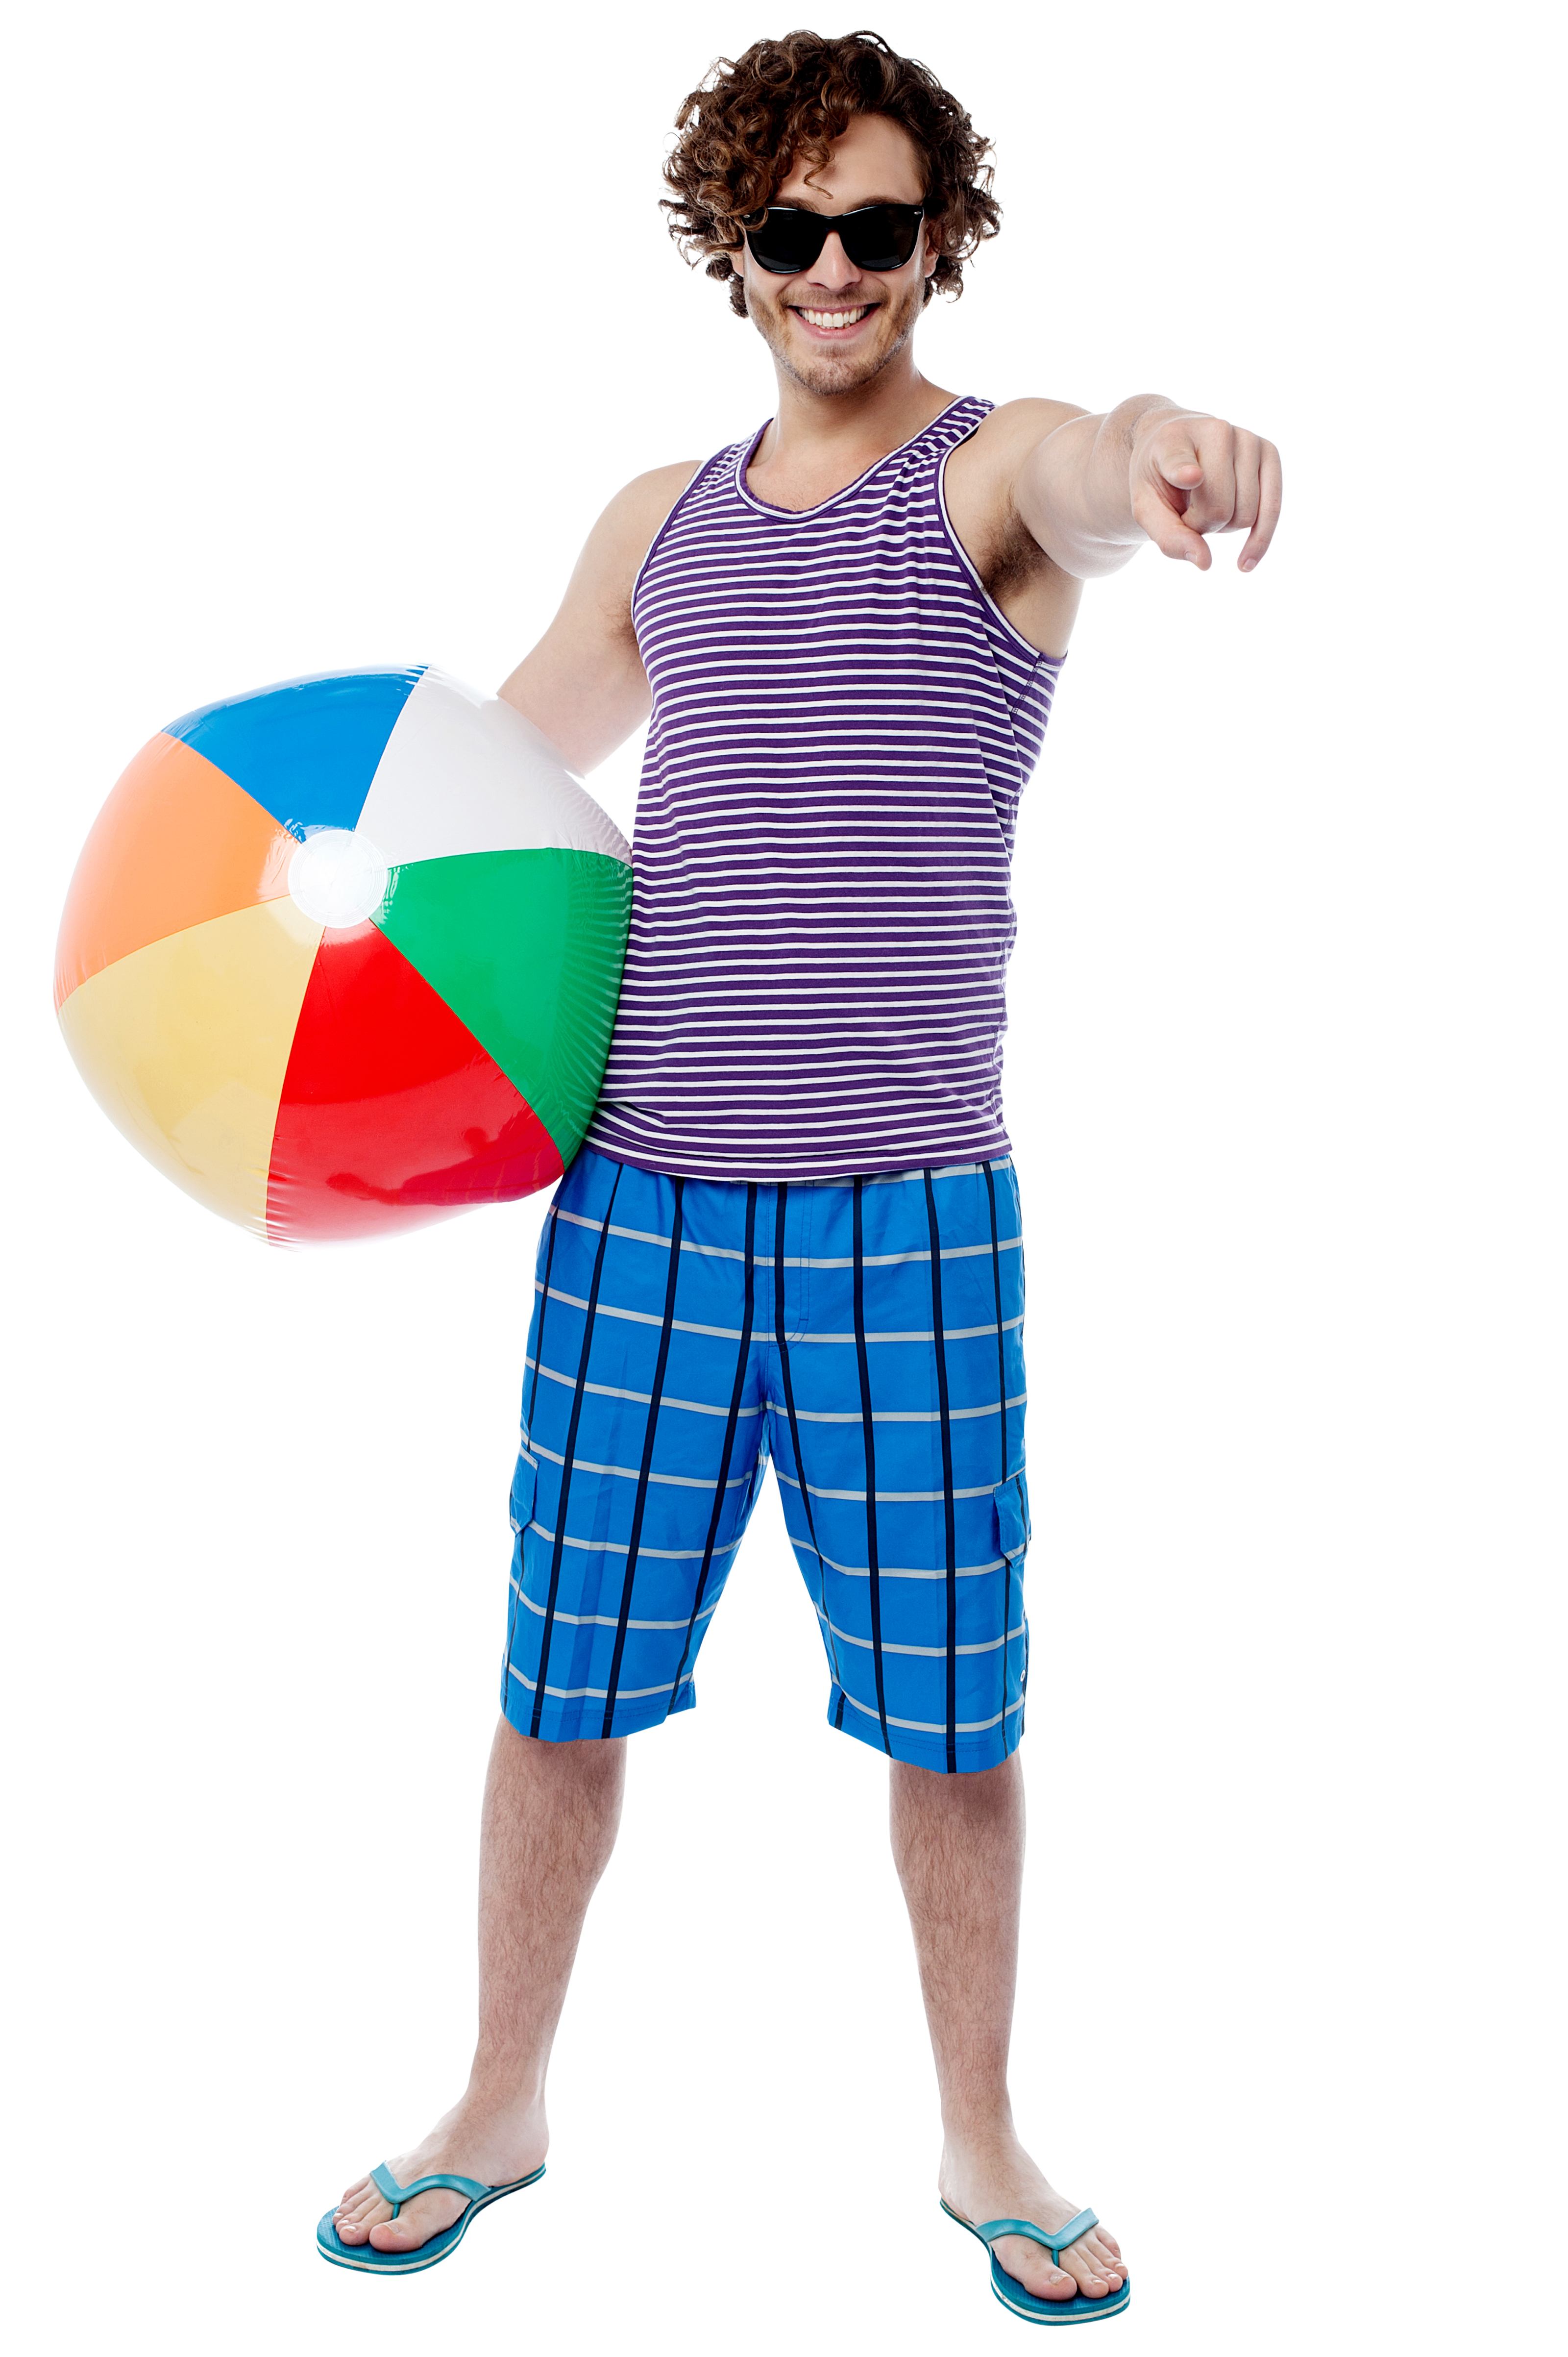 Men With Beach Ball Royalty Free Png Image - Beach Boy, Transparent background PNG HD thumbnail